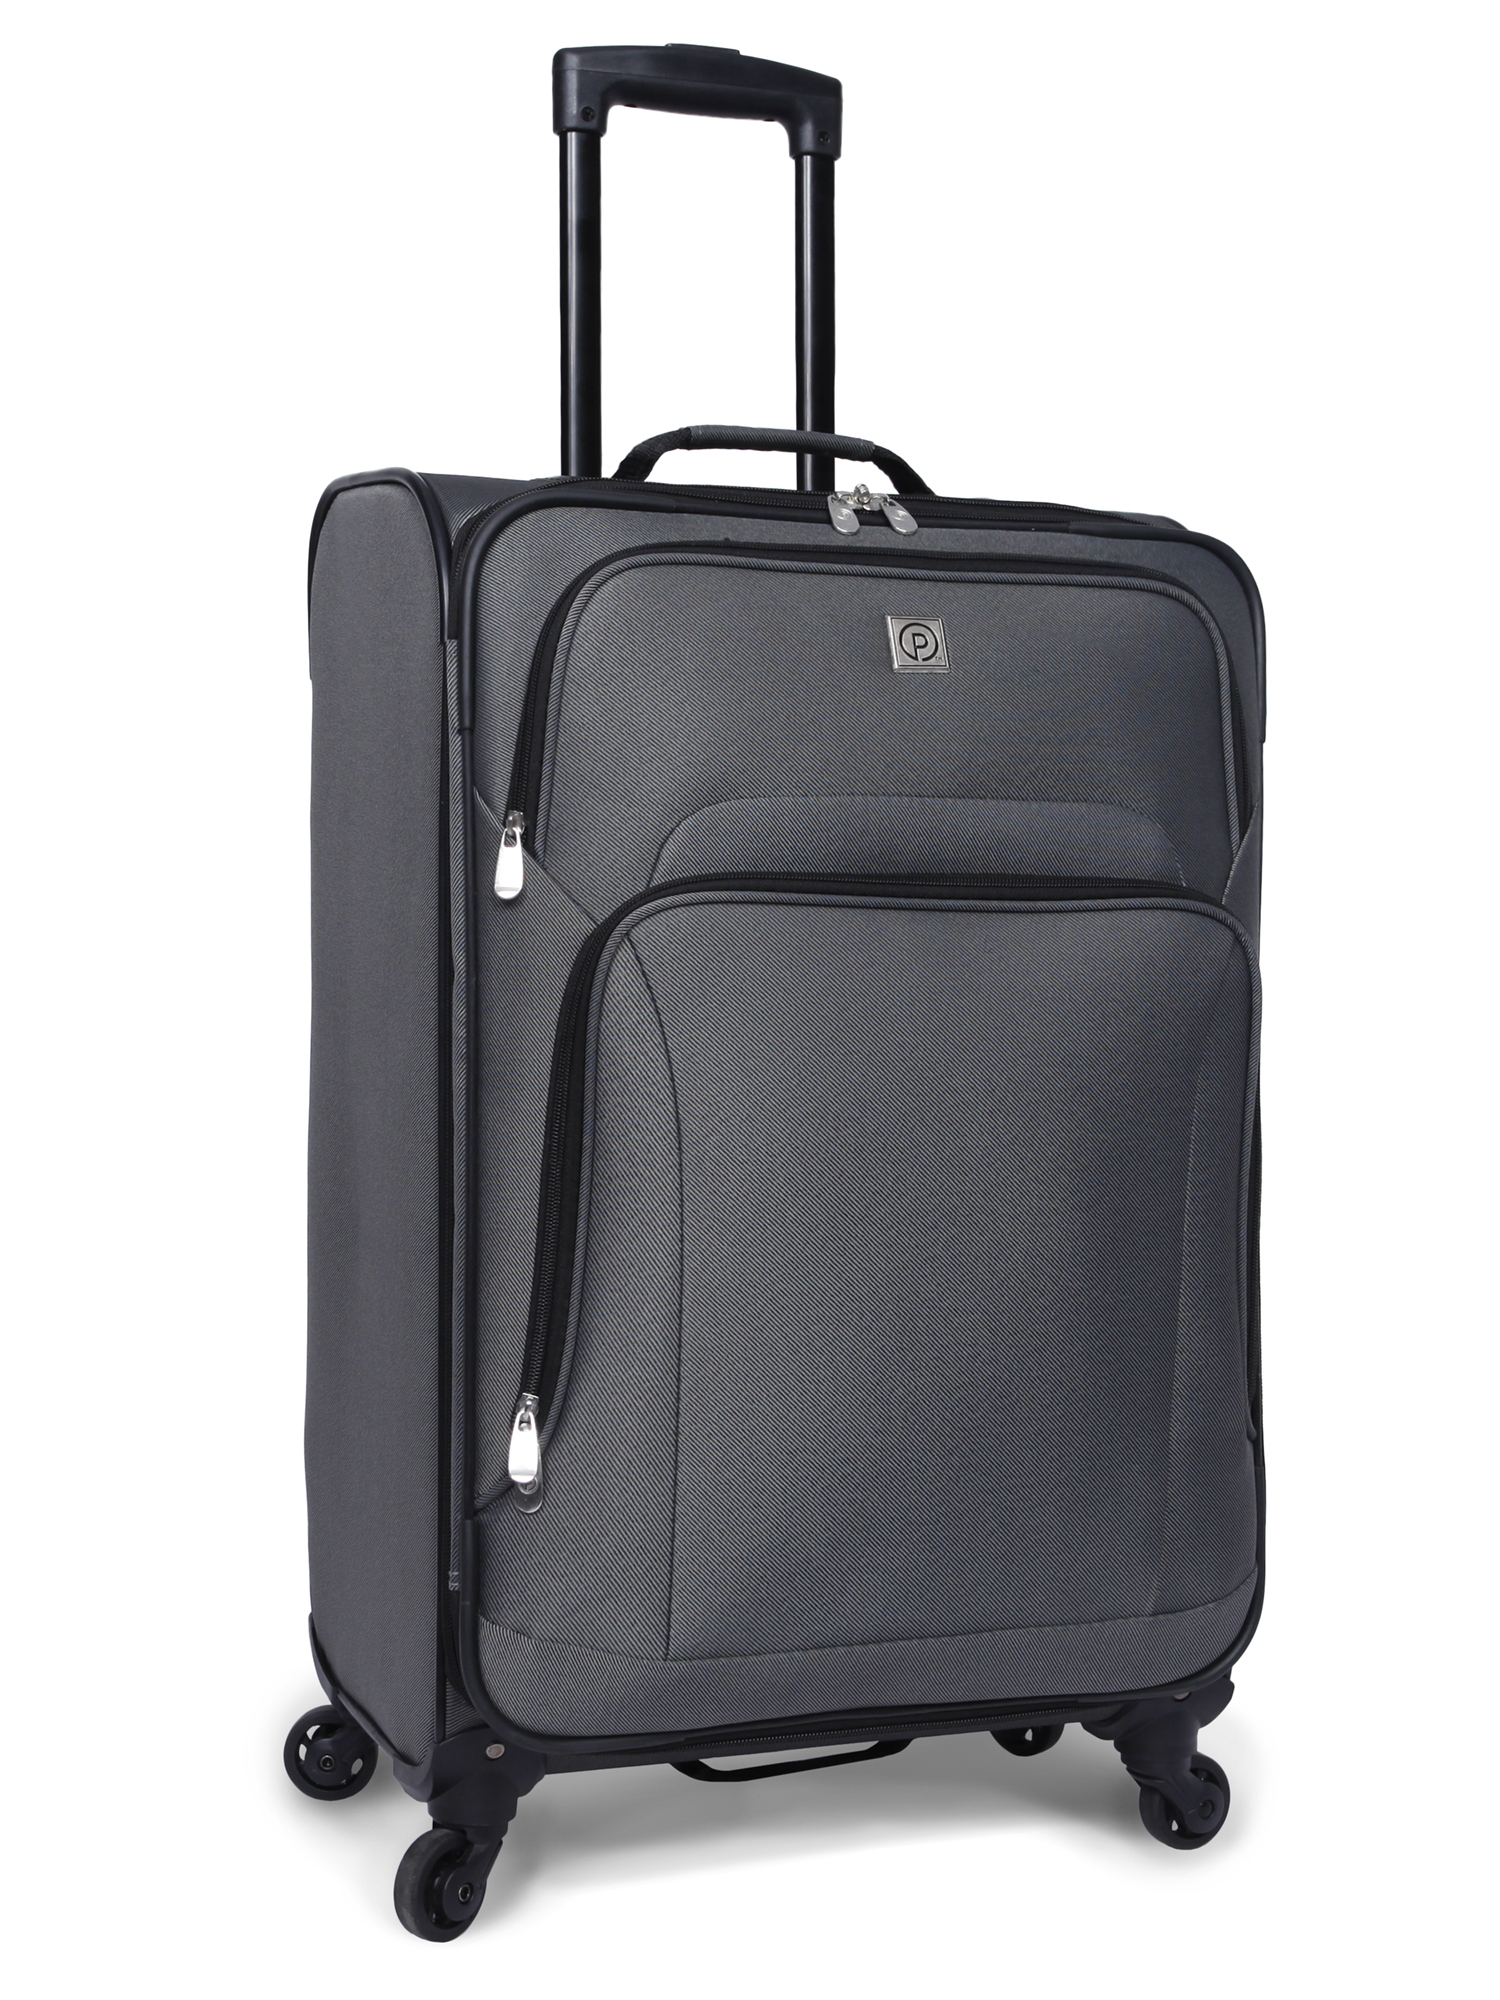 Protege 5 Pc Spinner Luggage Set With 28" & 24" Check Bags, 20" Carry-on, Gray - image 4 of 12